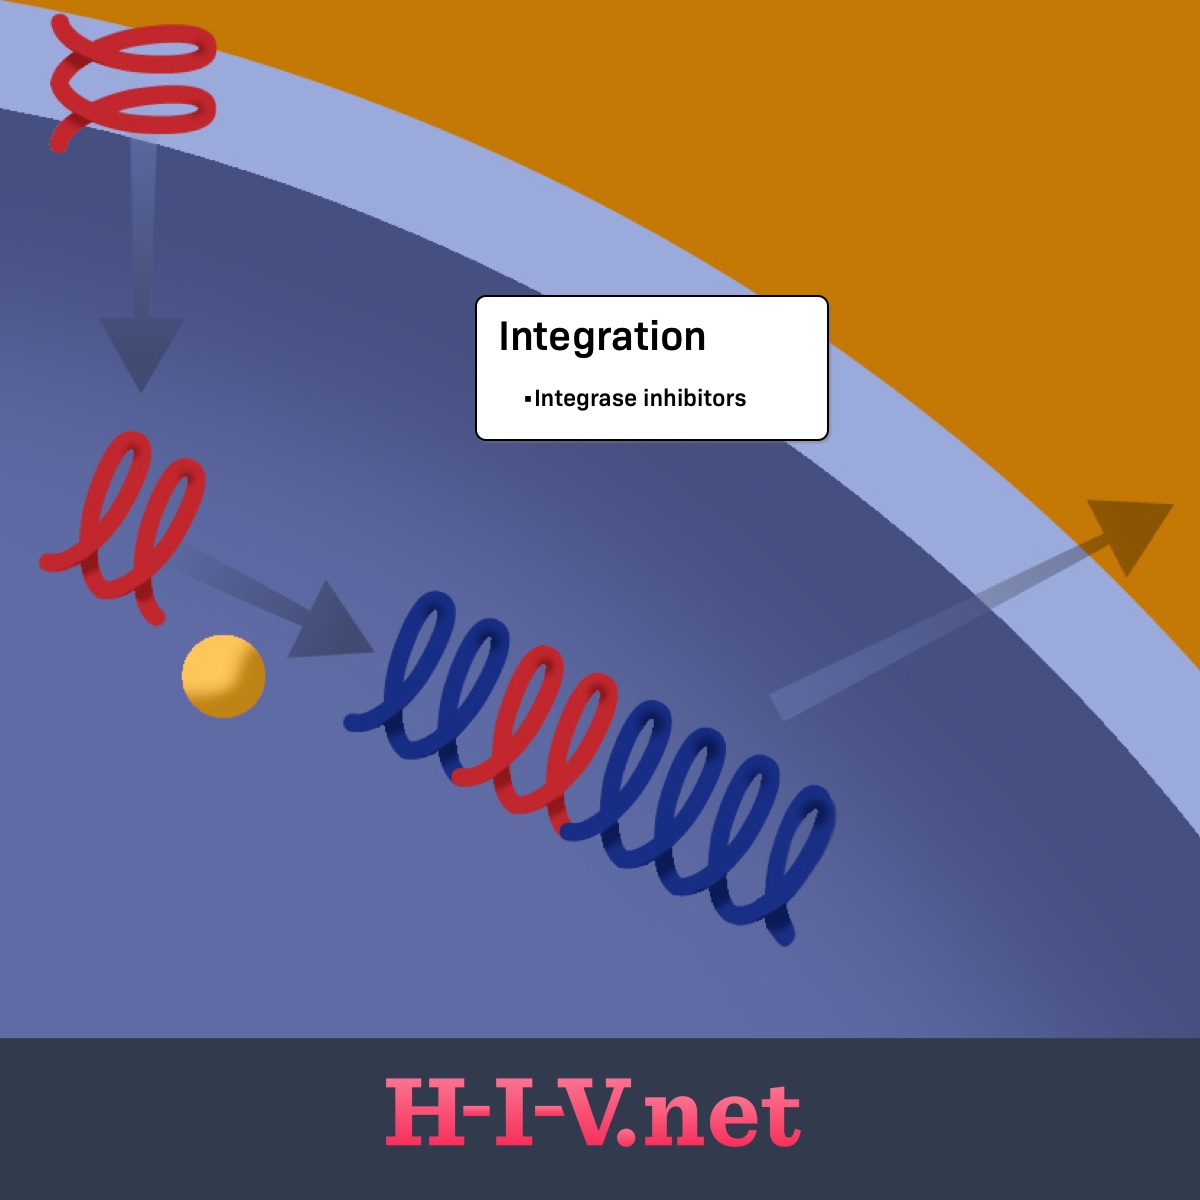 Integrase inhibitors target integration in the HIV life cycle